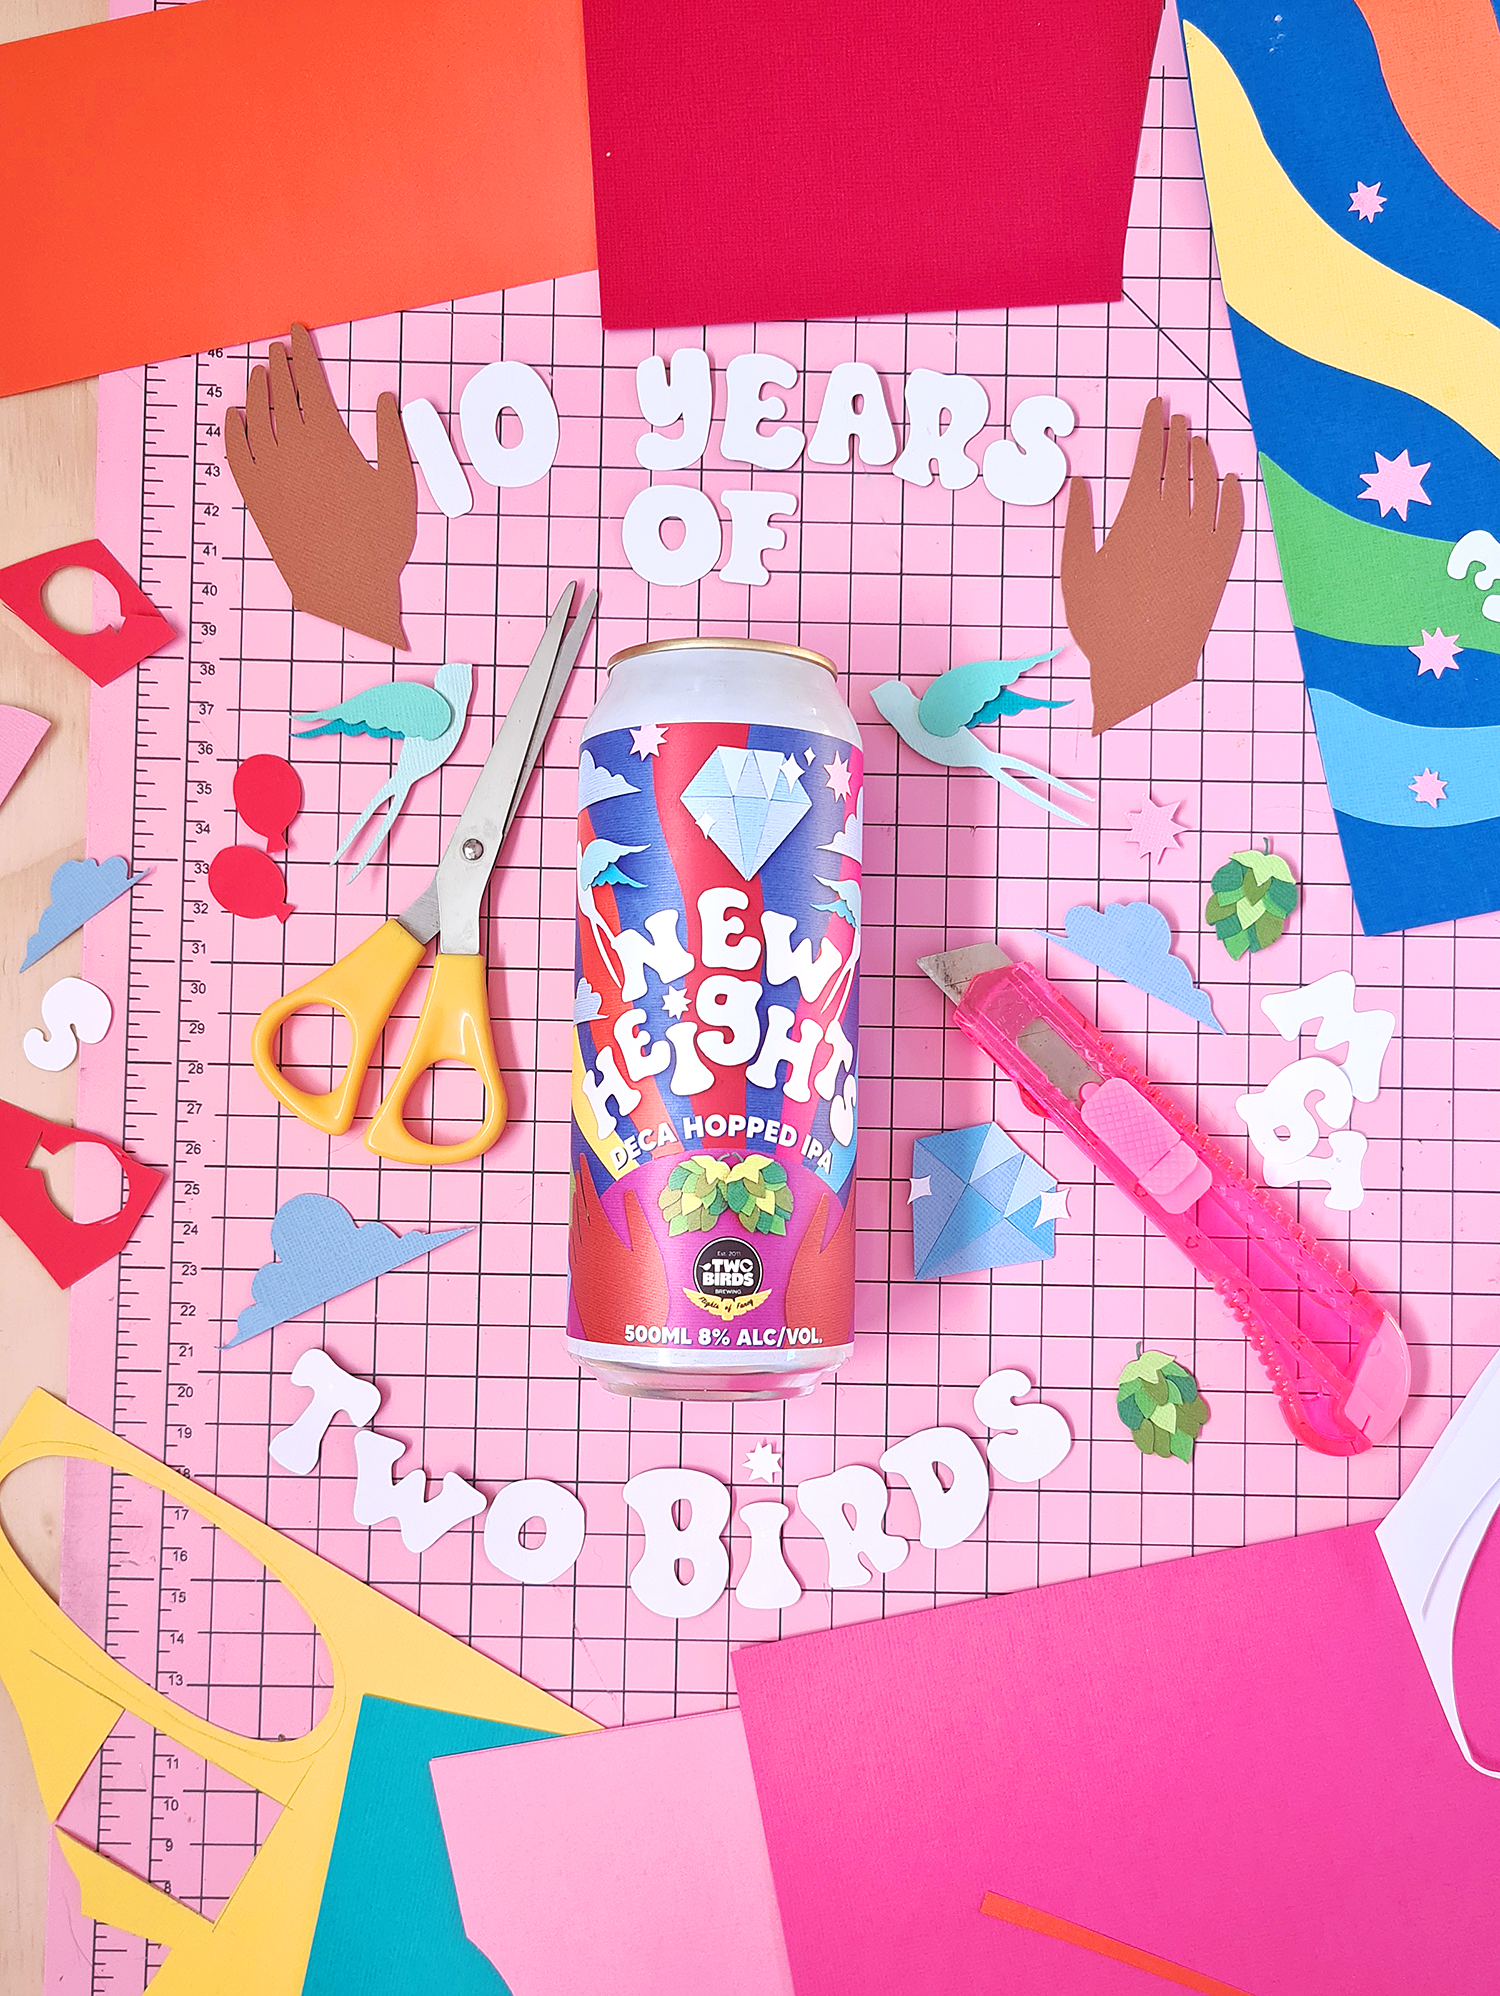 A colourful beer can with papercraft collage illustrated label lies on a studio desk surround by the text “10 years of Two Birds”, and various craft supplies. 